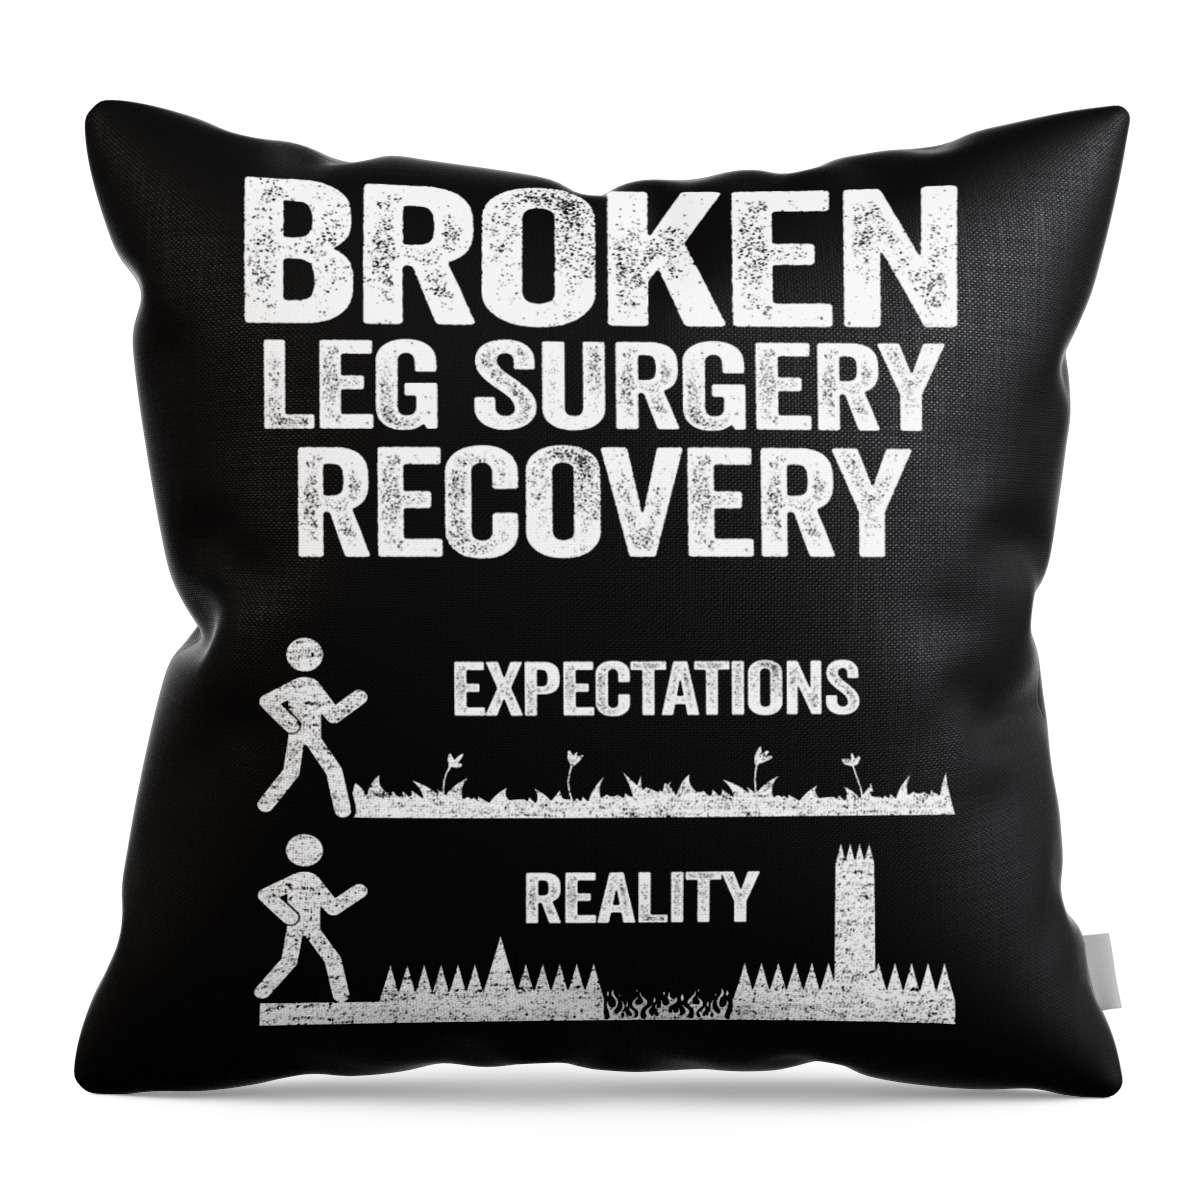 Spinal Fusion - Spine Back Surgery Get Well Gift Throw Pillow for